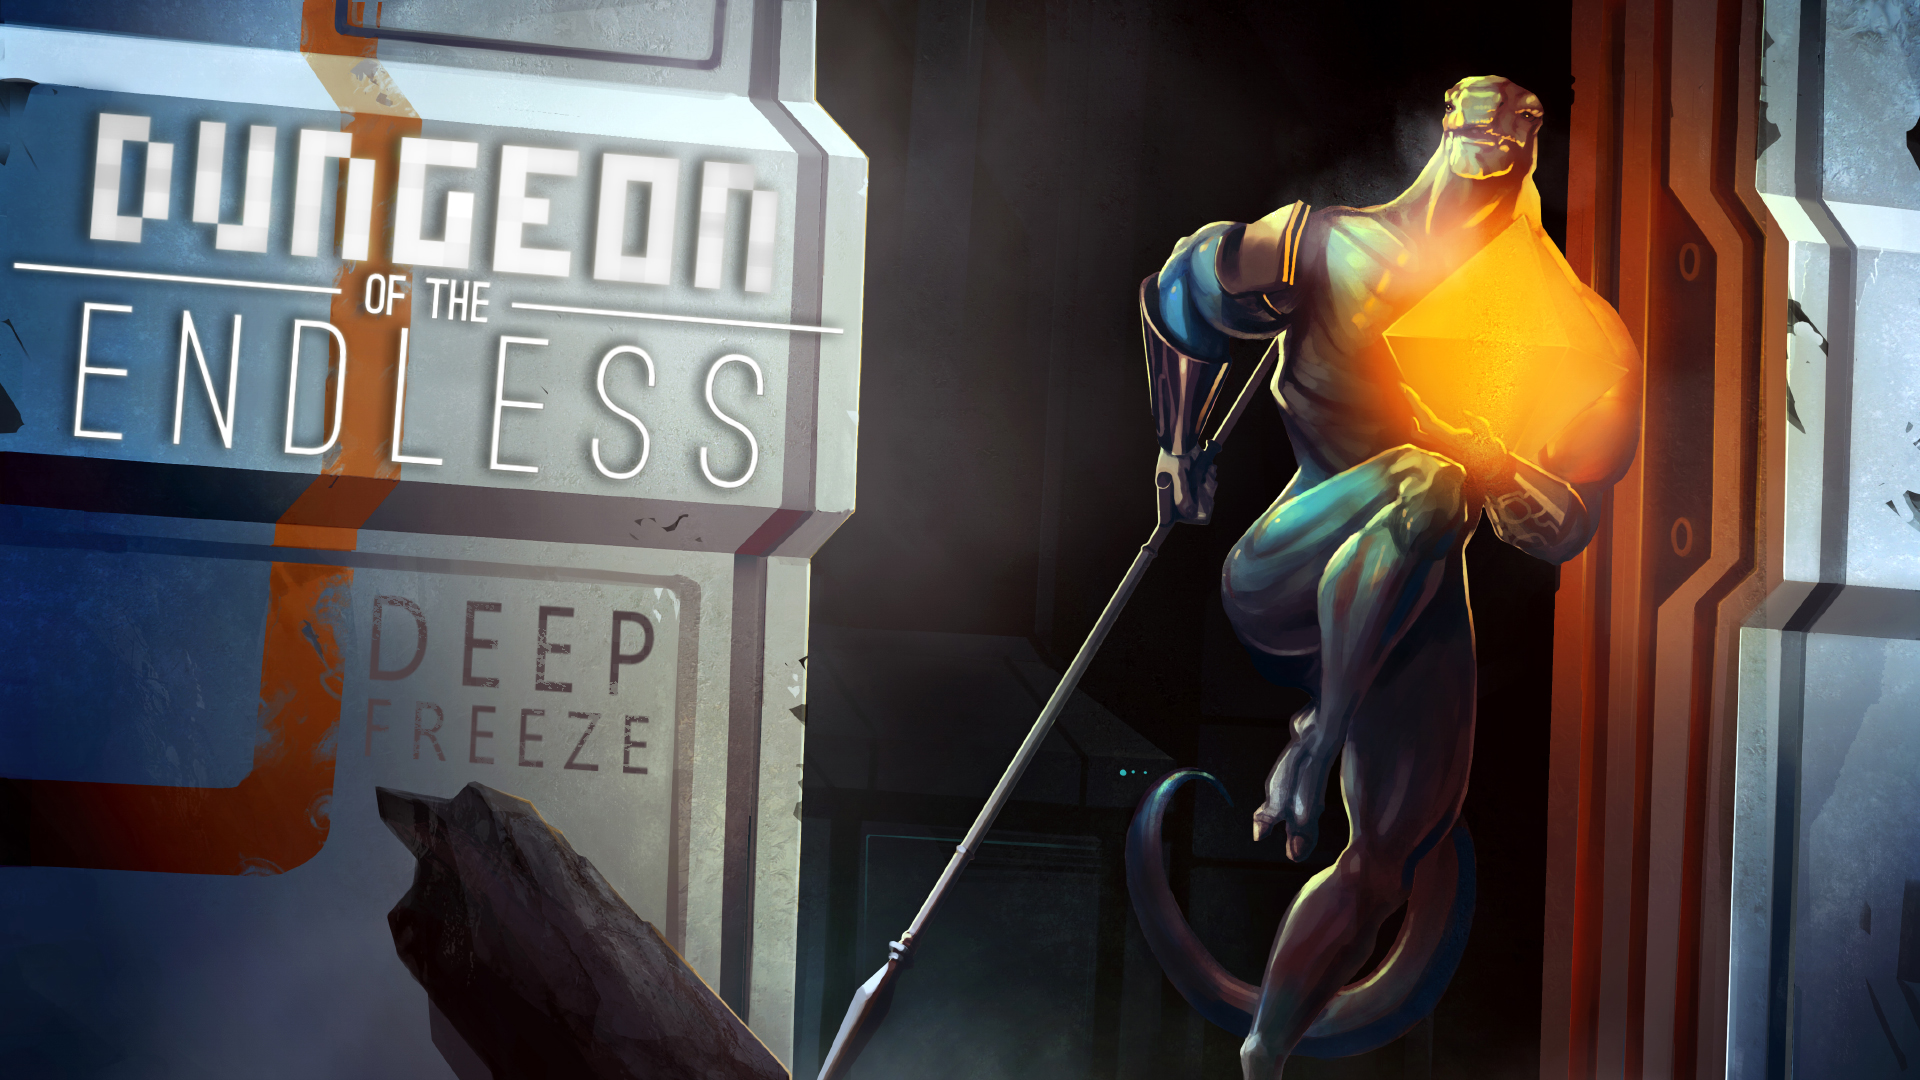 endless dungeon release date